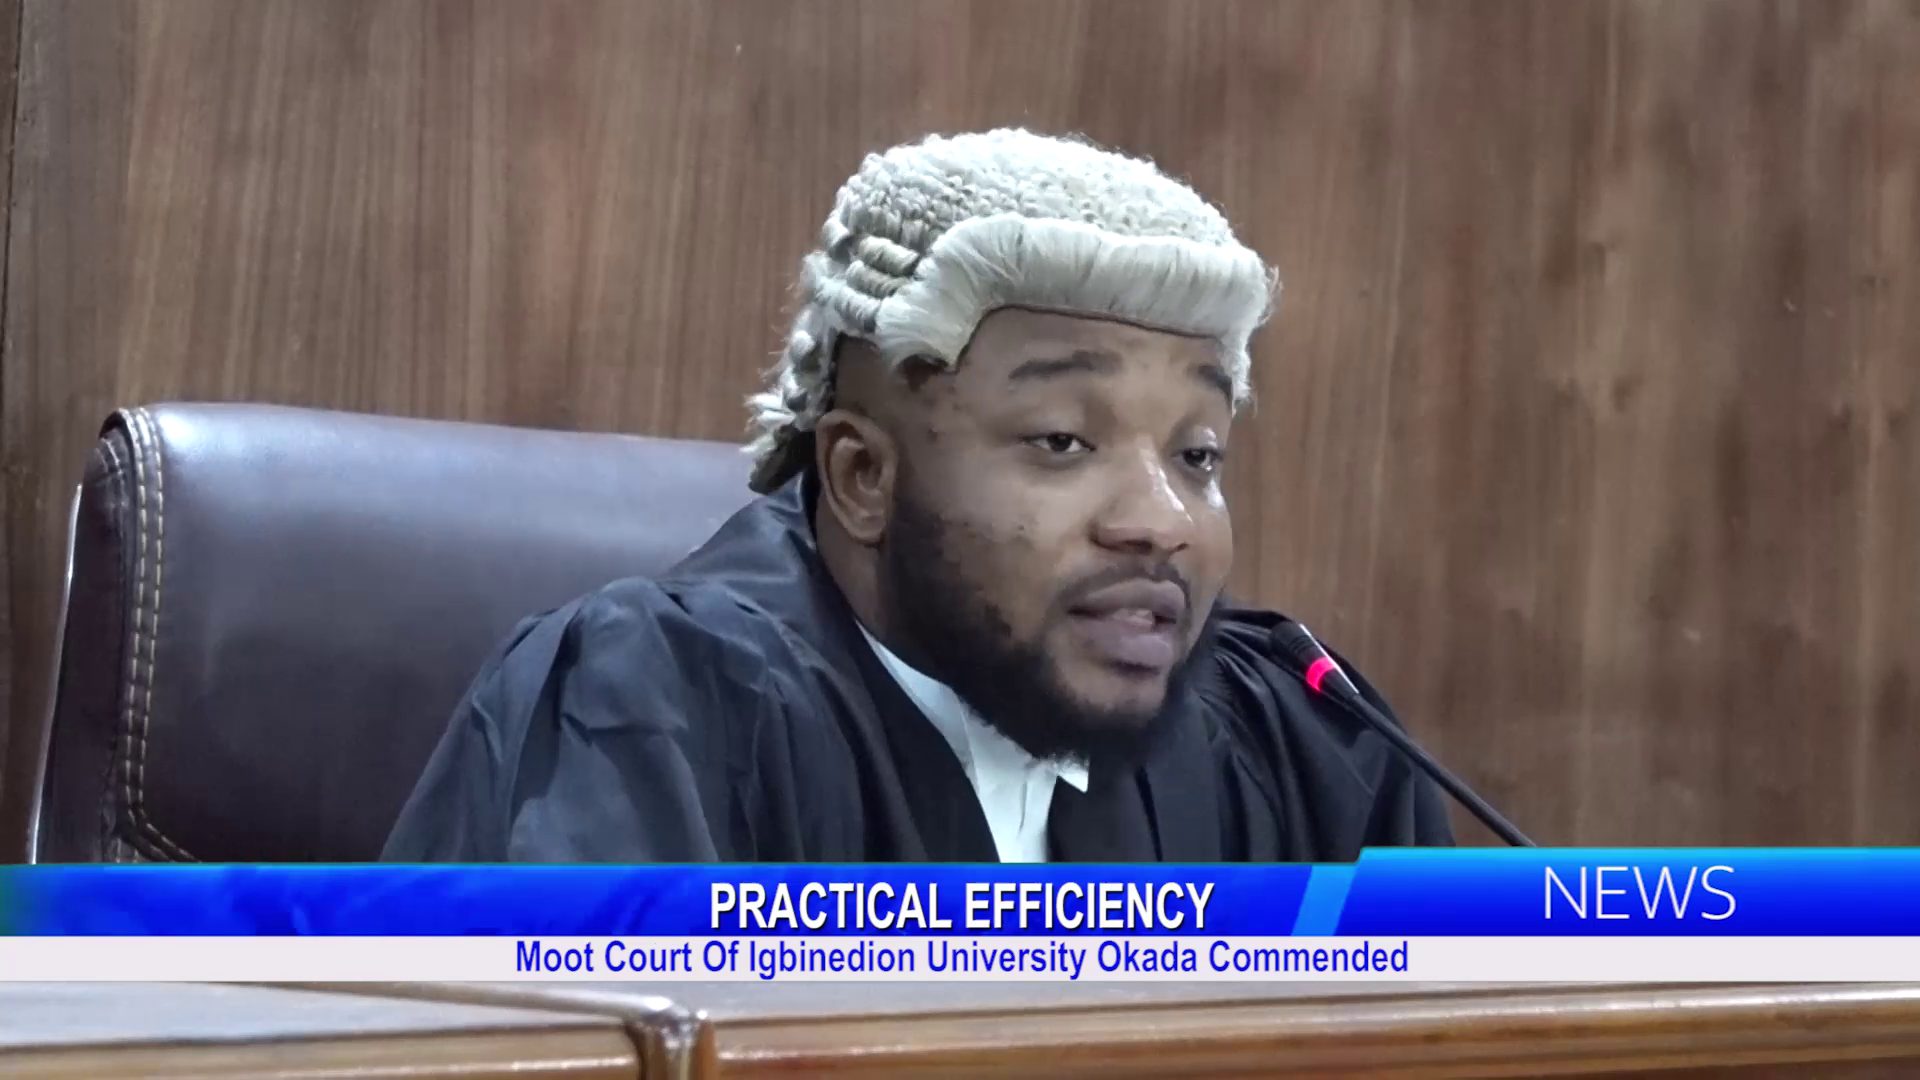 Practical Efficiency: Moot Court Of Igbinedion University Okada Commended